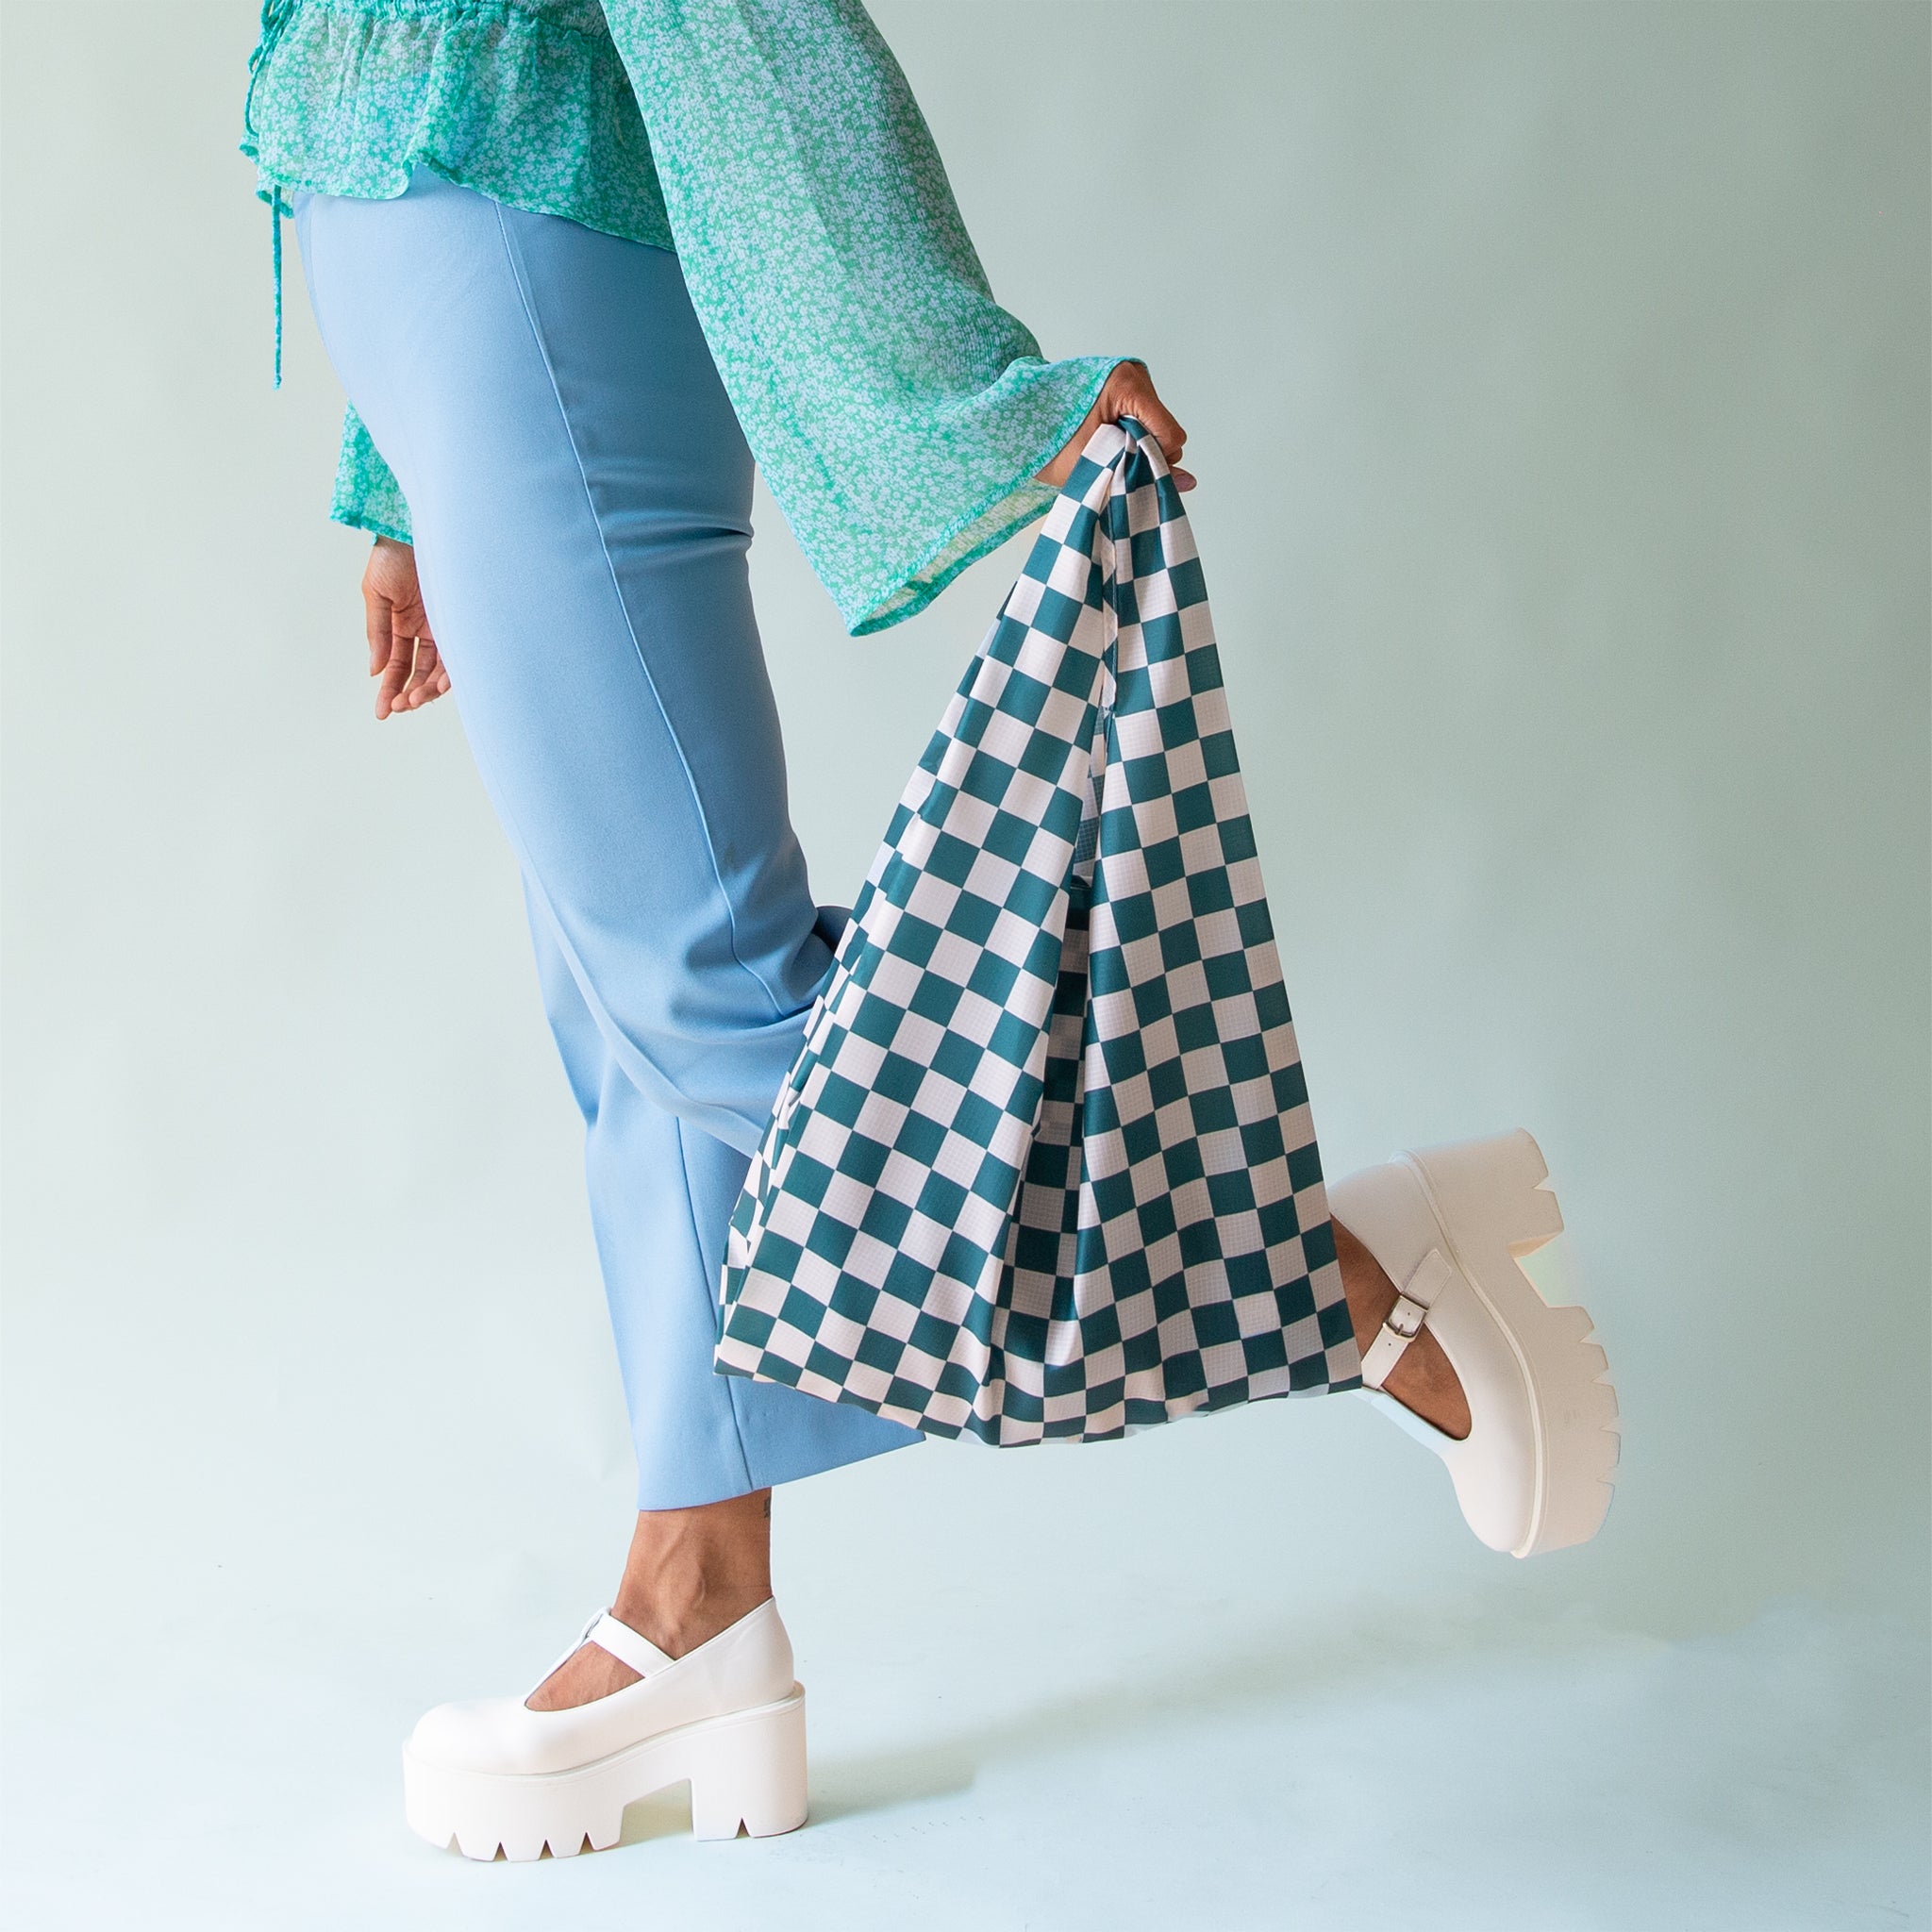 On a light blue background is a model holding a dark turquoise and light blue checkered print reusable nylon bag.